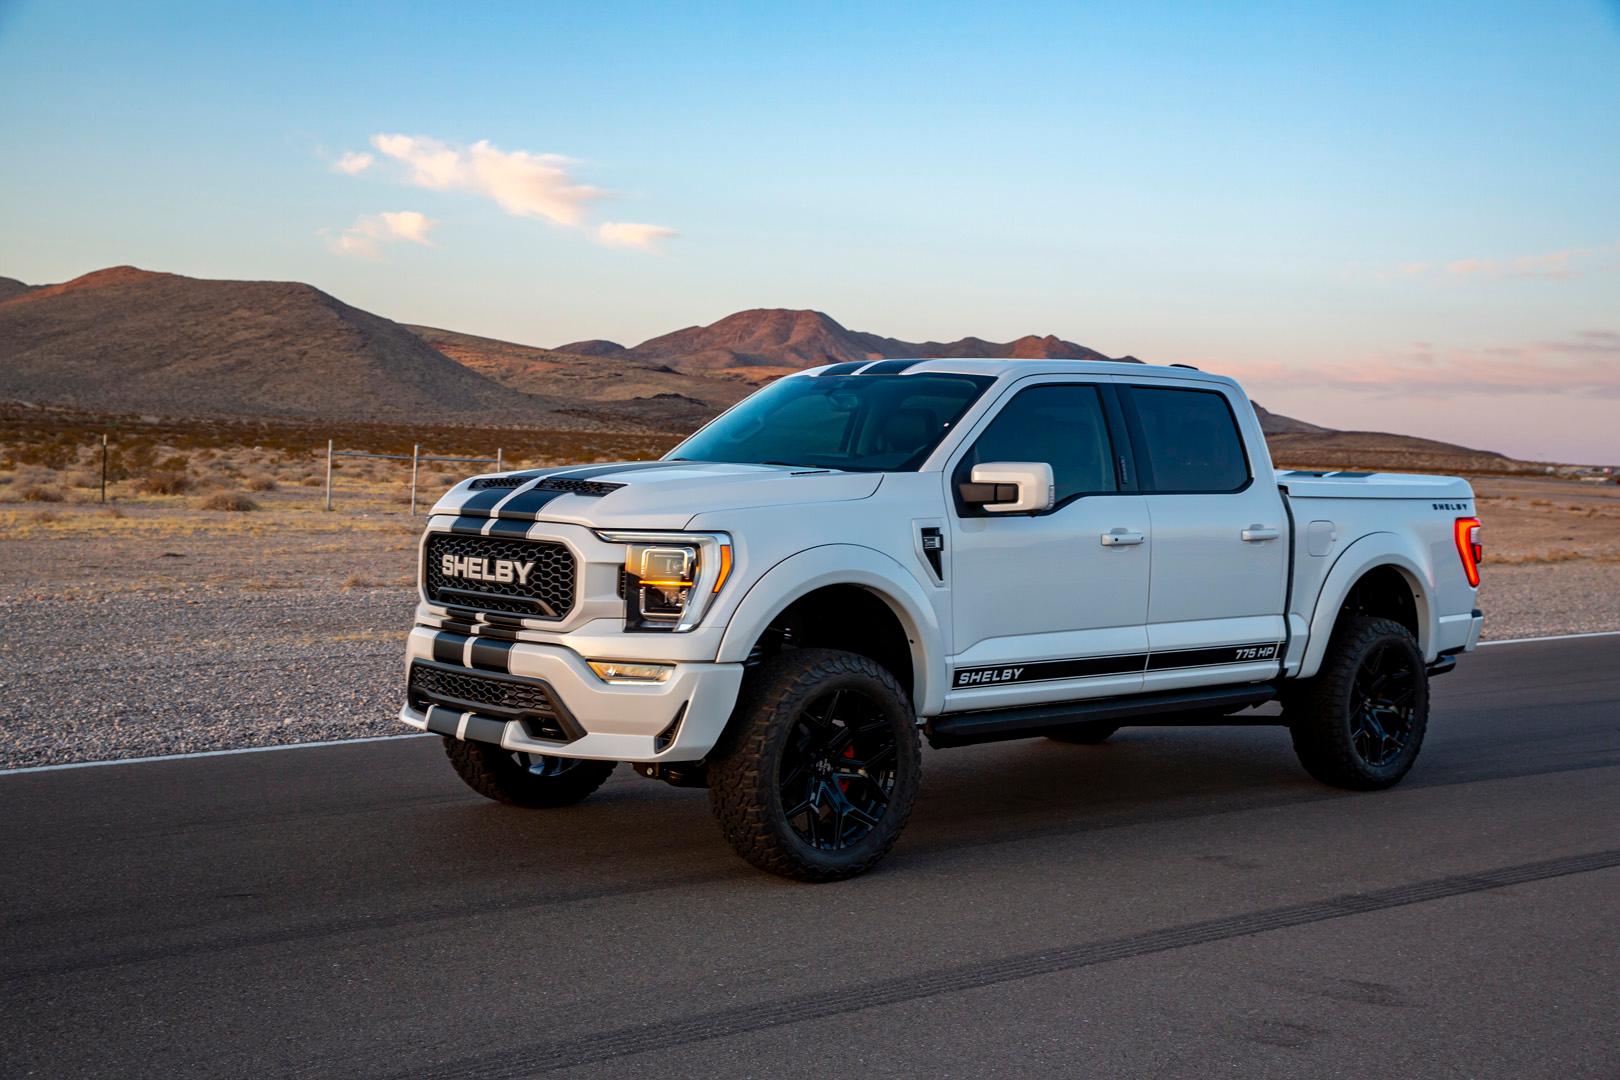 A Ford Shelby Truck is bound to be powerful, but one of these incredible truck certainly doesn’t come cheap.